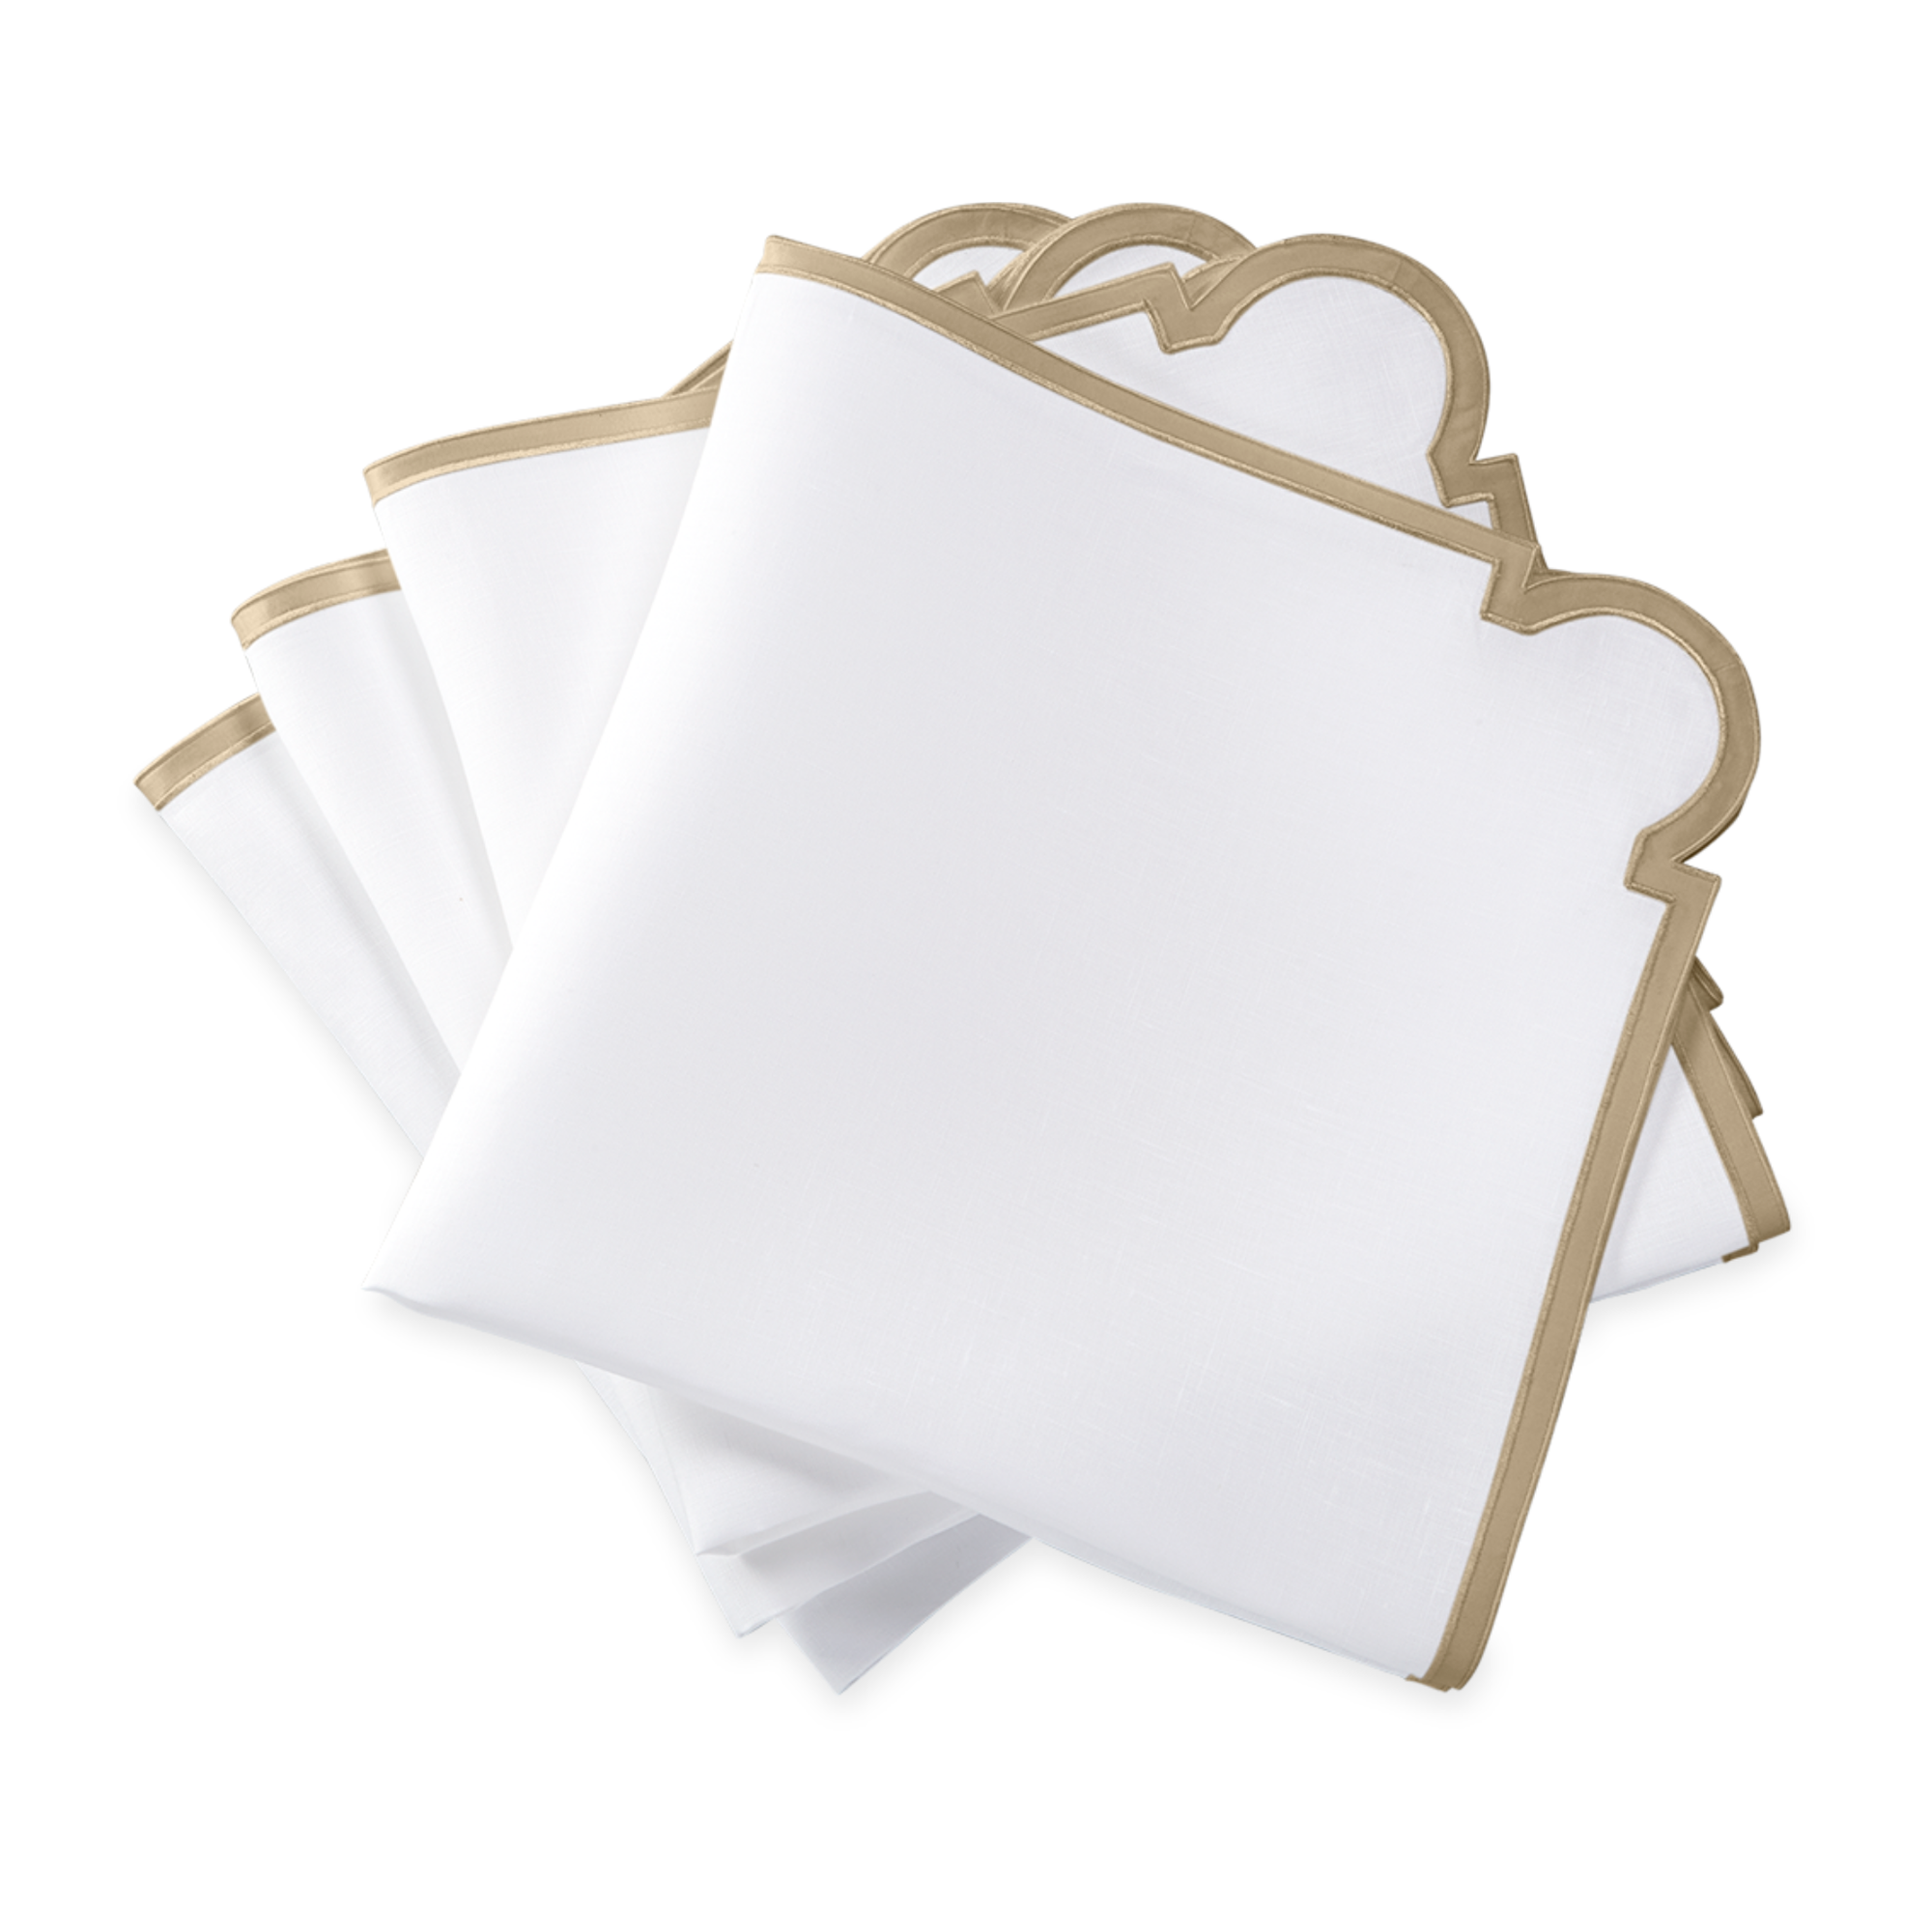 Stack of Matouk Mirasol Table Linen Napkins in Champagne Color